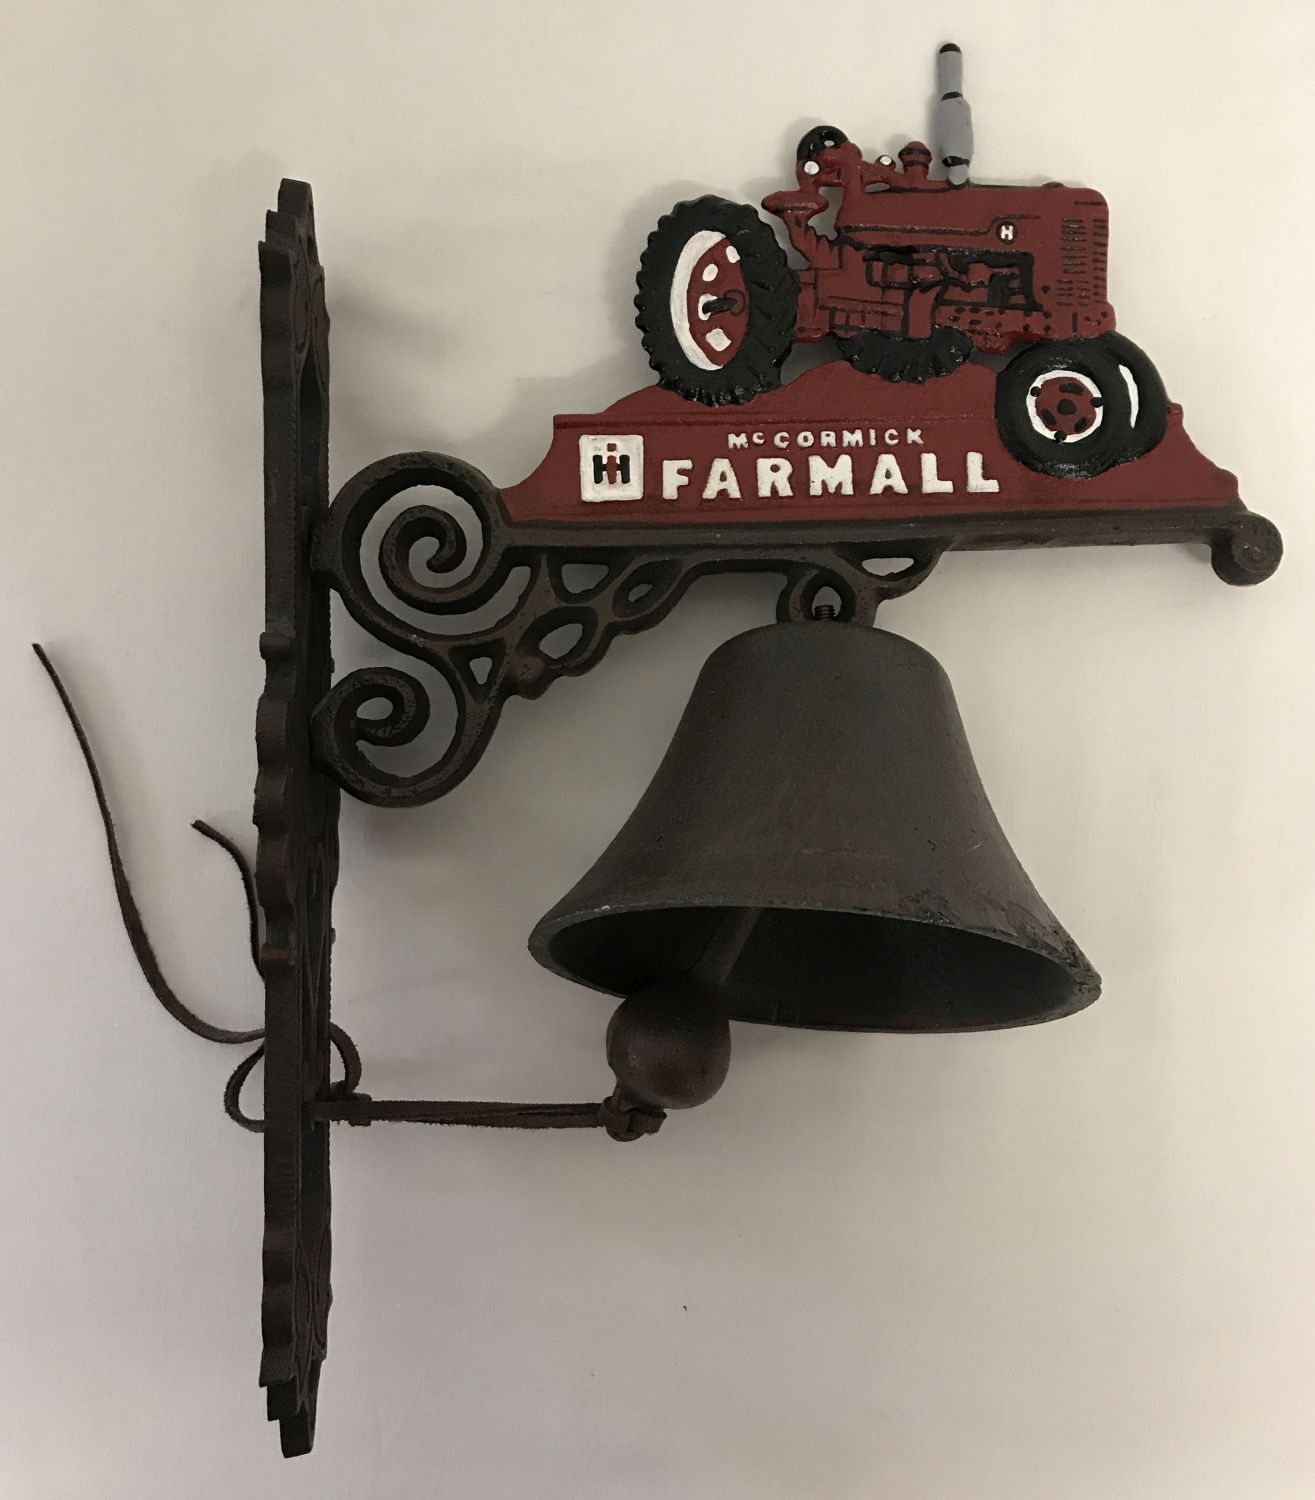 A cast metal wall hanging garden bell with McCormick Farmall tractor decoration.